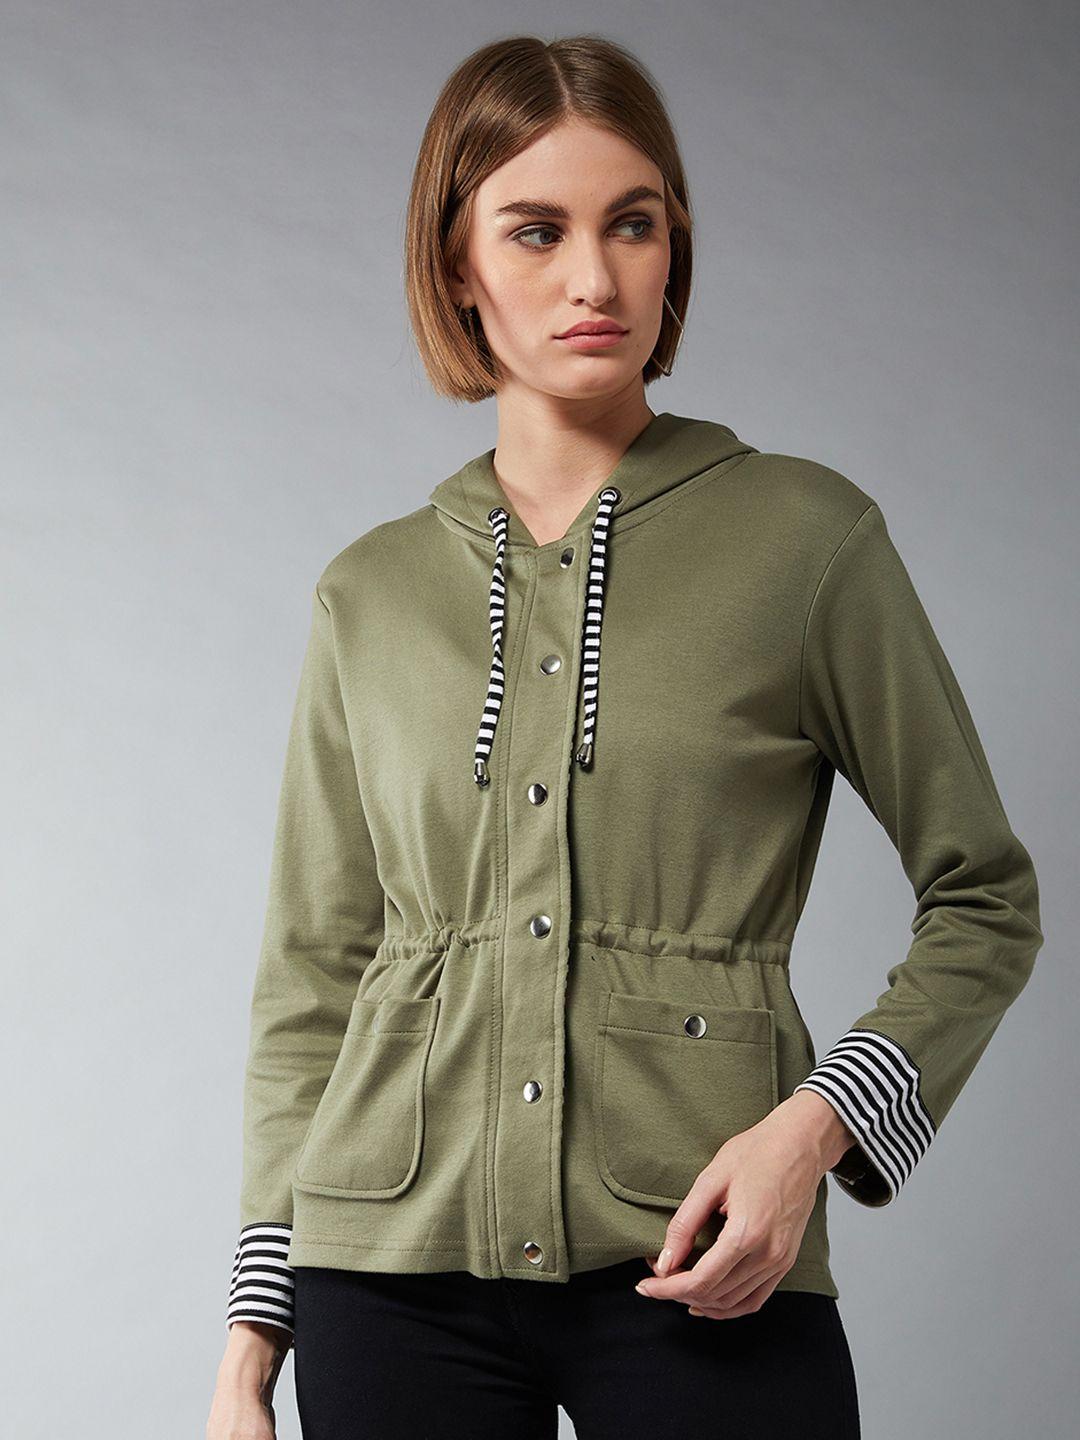 dolce-crudo-women-olive-green-solid-tailored-jacket